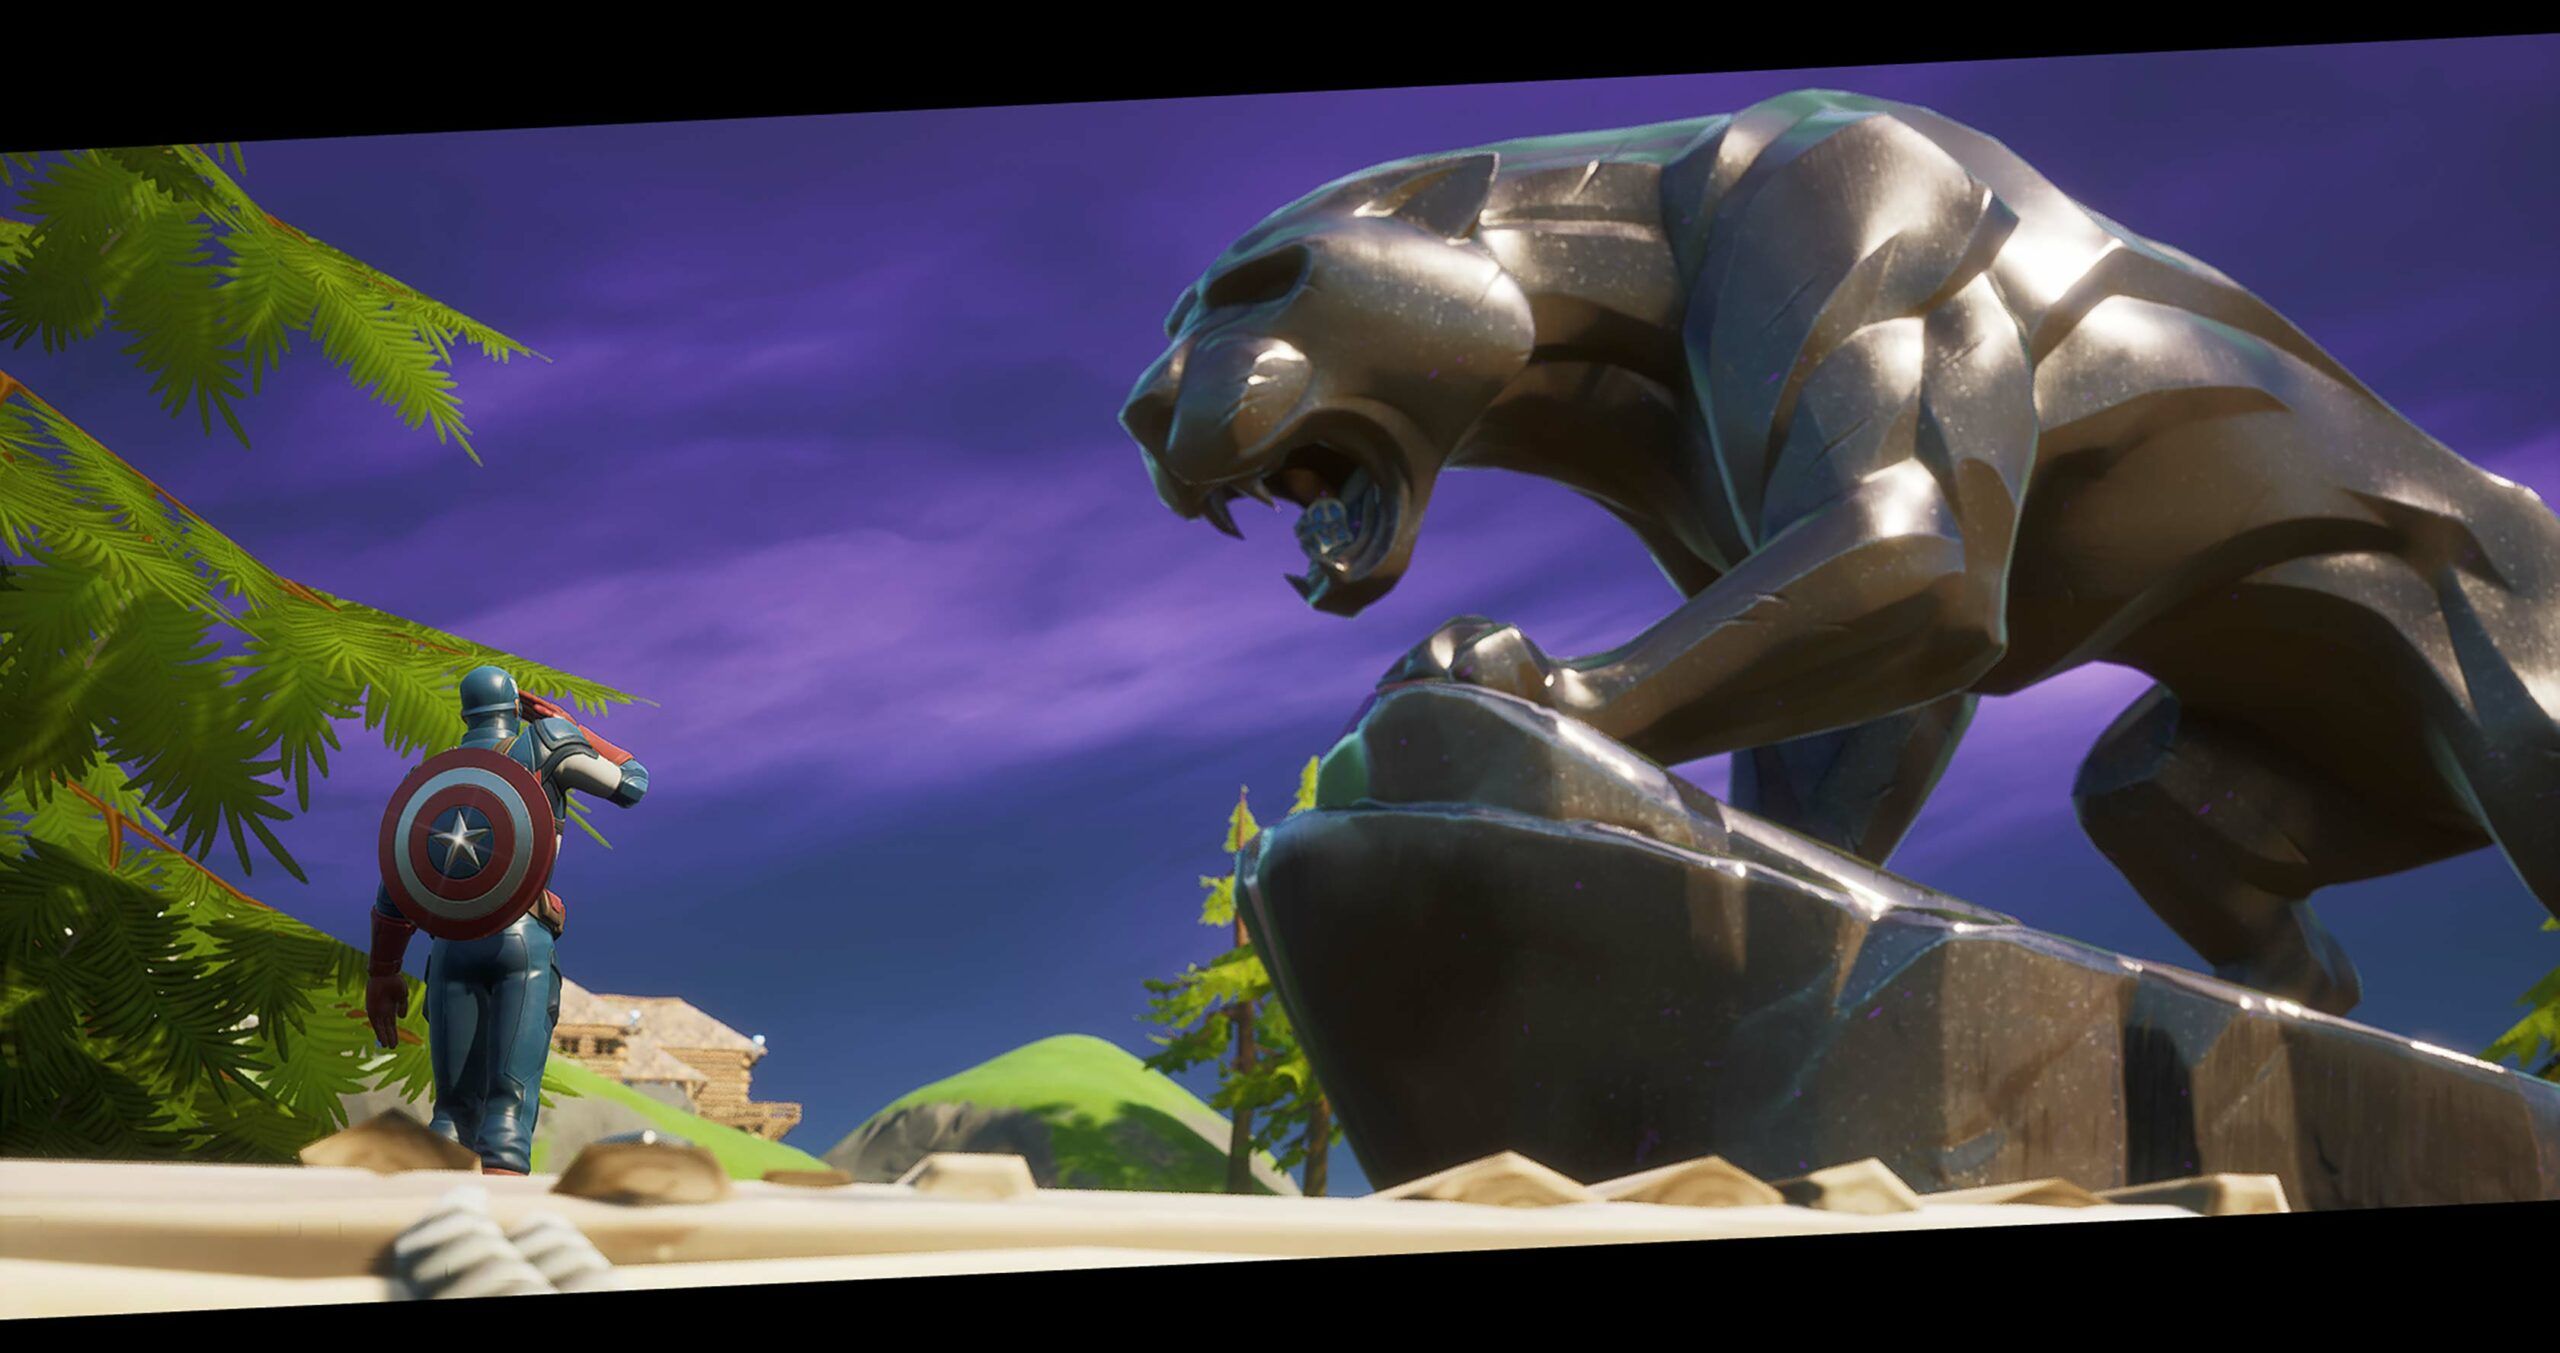 Epic adds Black Panther statue to Fortnite during Marvel crossover event